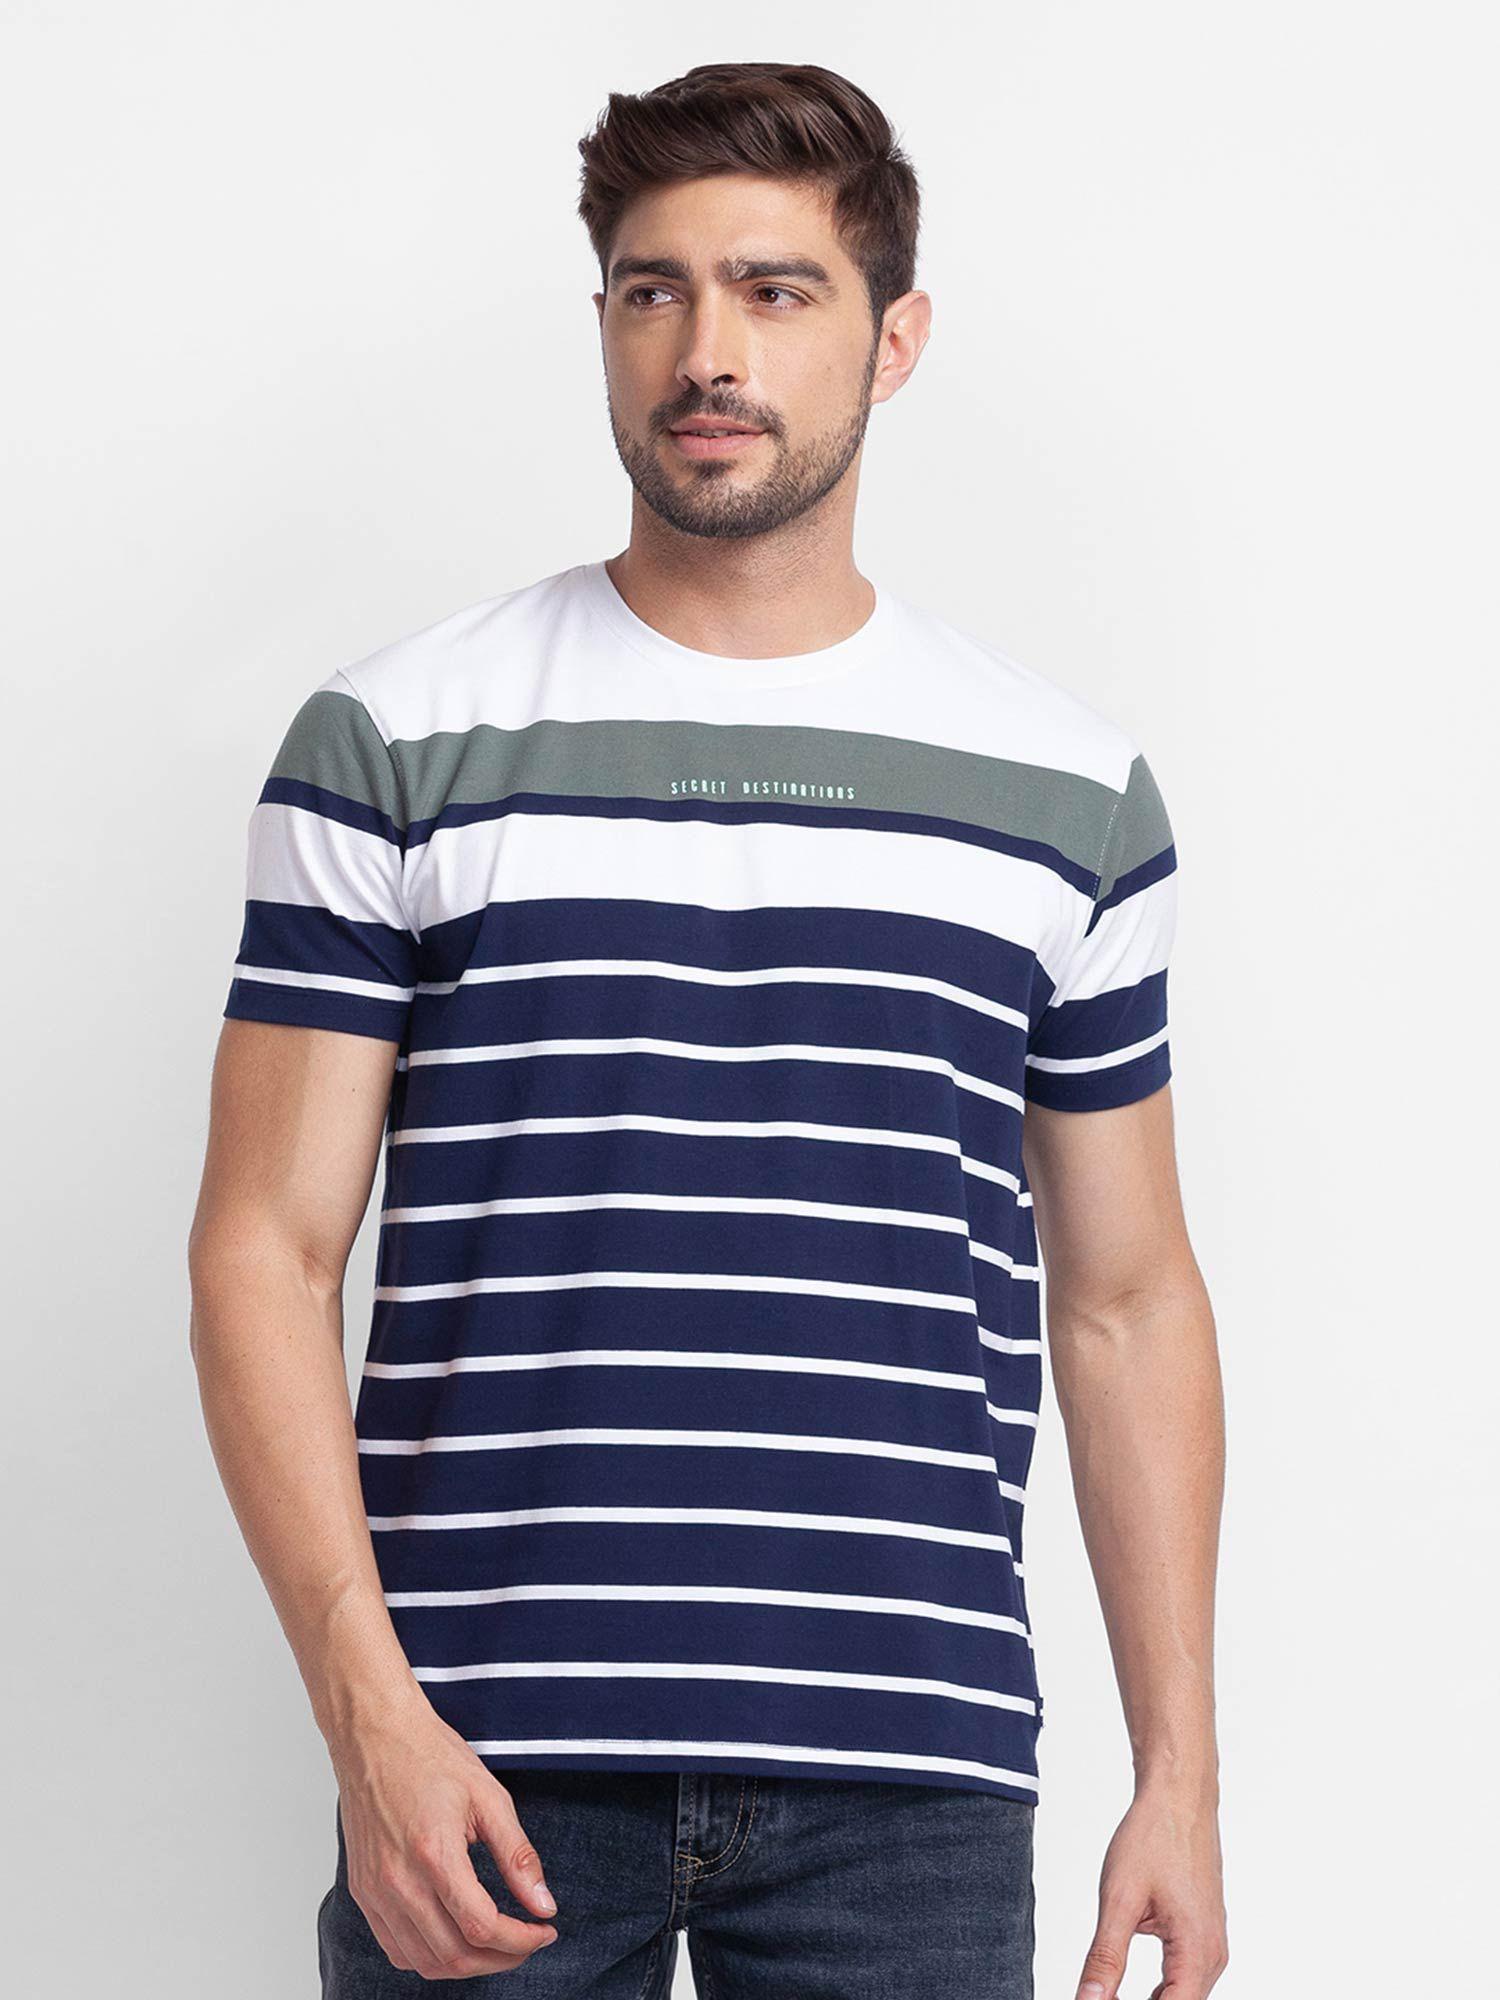 white-cotton-half-sleeve-stripes-casual-t-shirt-for-men